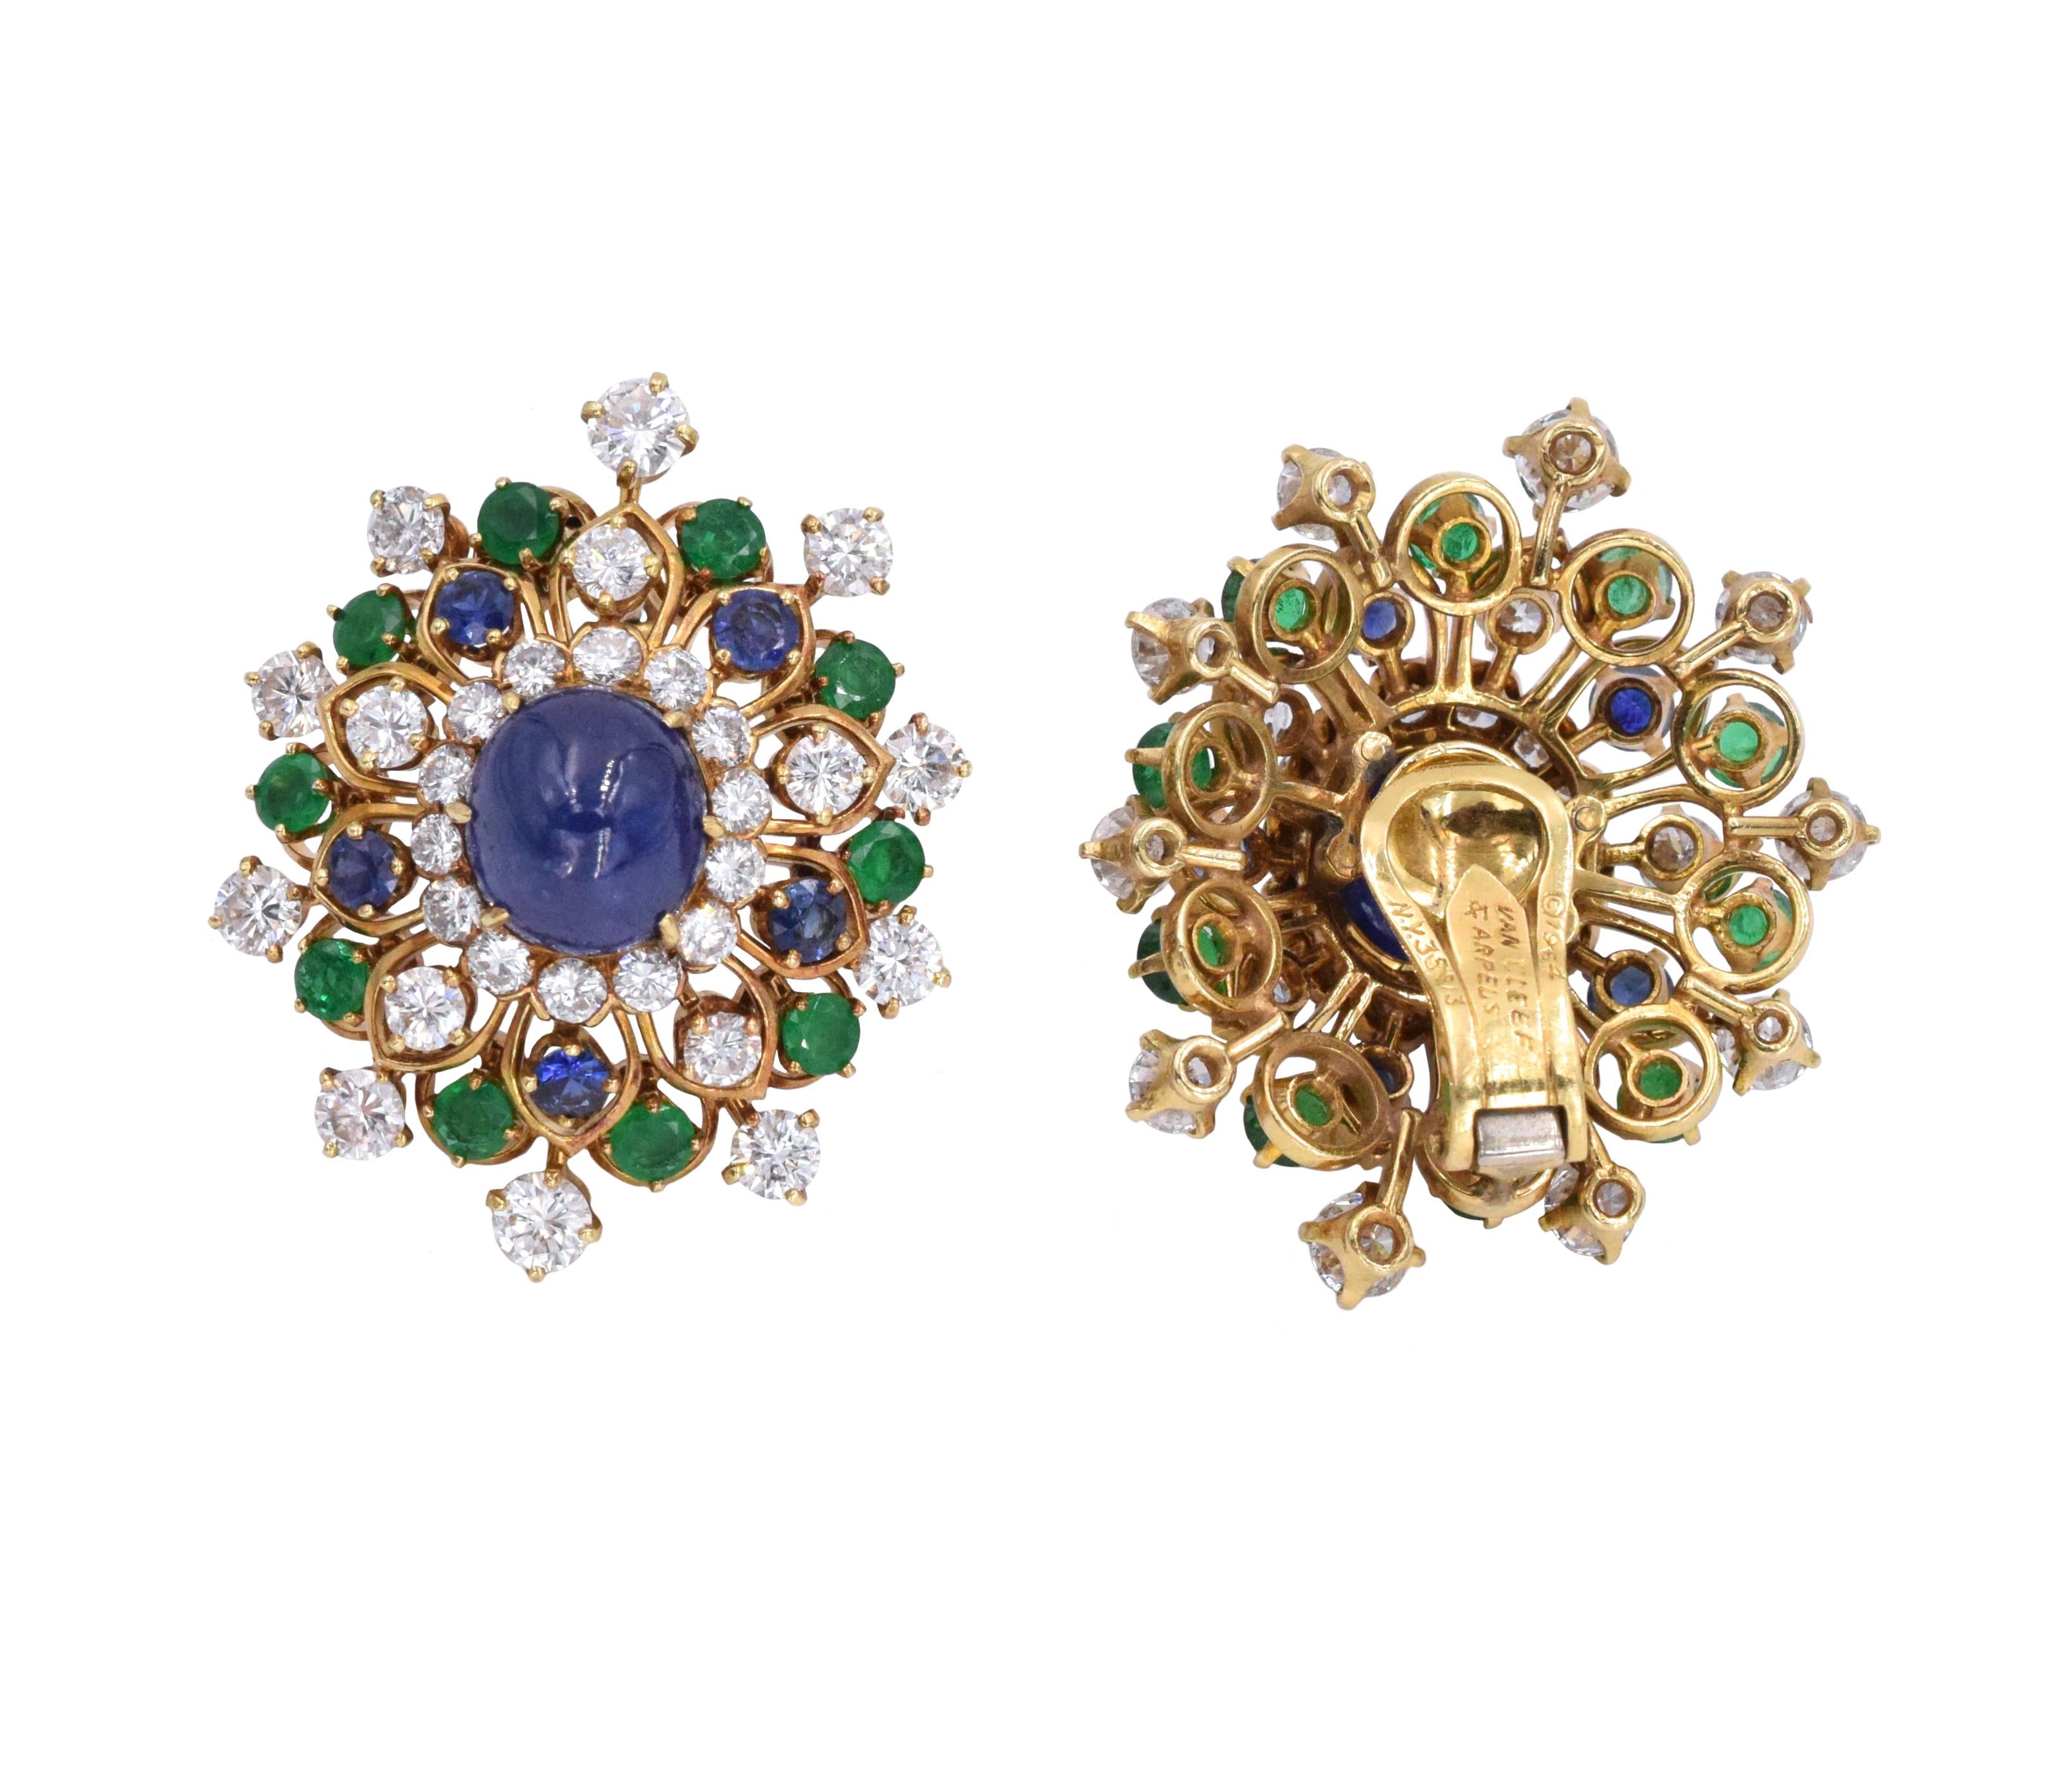 Van Cleef & Arpels Diamond, Gemstone and Gold Earrings. This pair of earrings has 58 round brilliant diamonds with a total carat weight of approximately 7.5ct, 20 round emeralds with a total carat weight of approximately 2ct, 10 round sapphires with